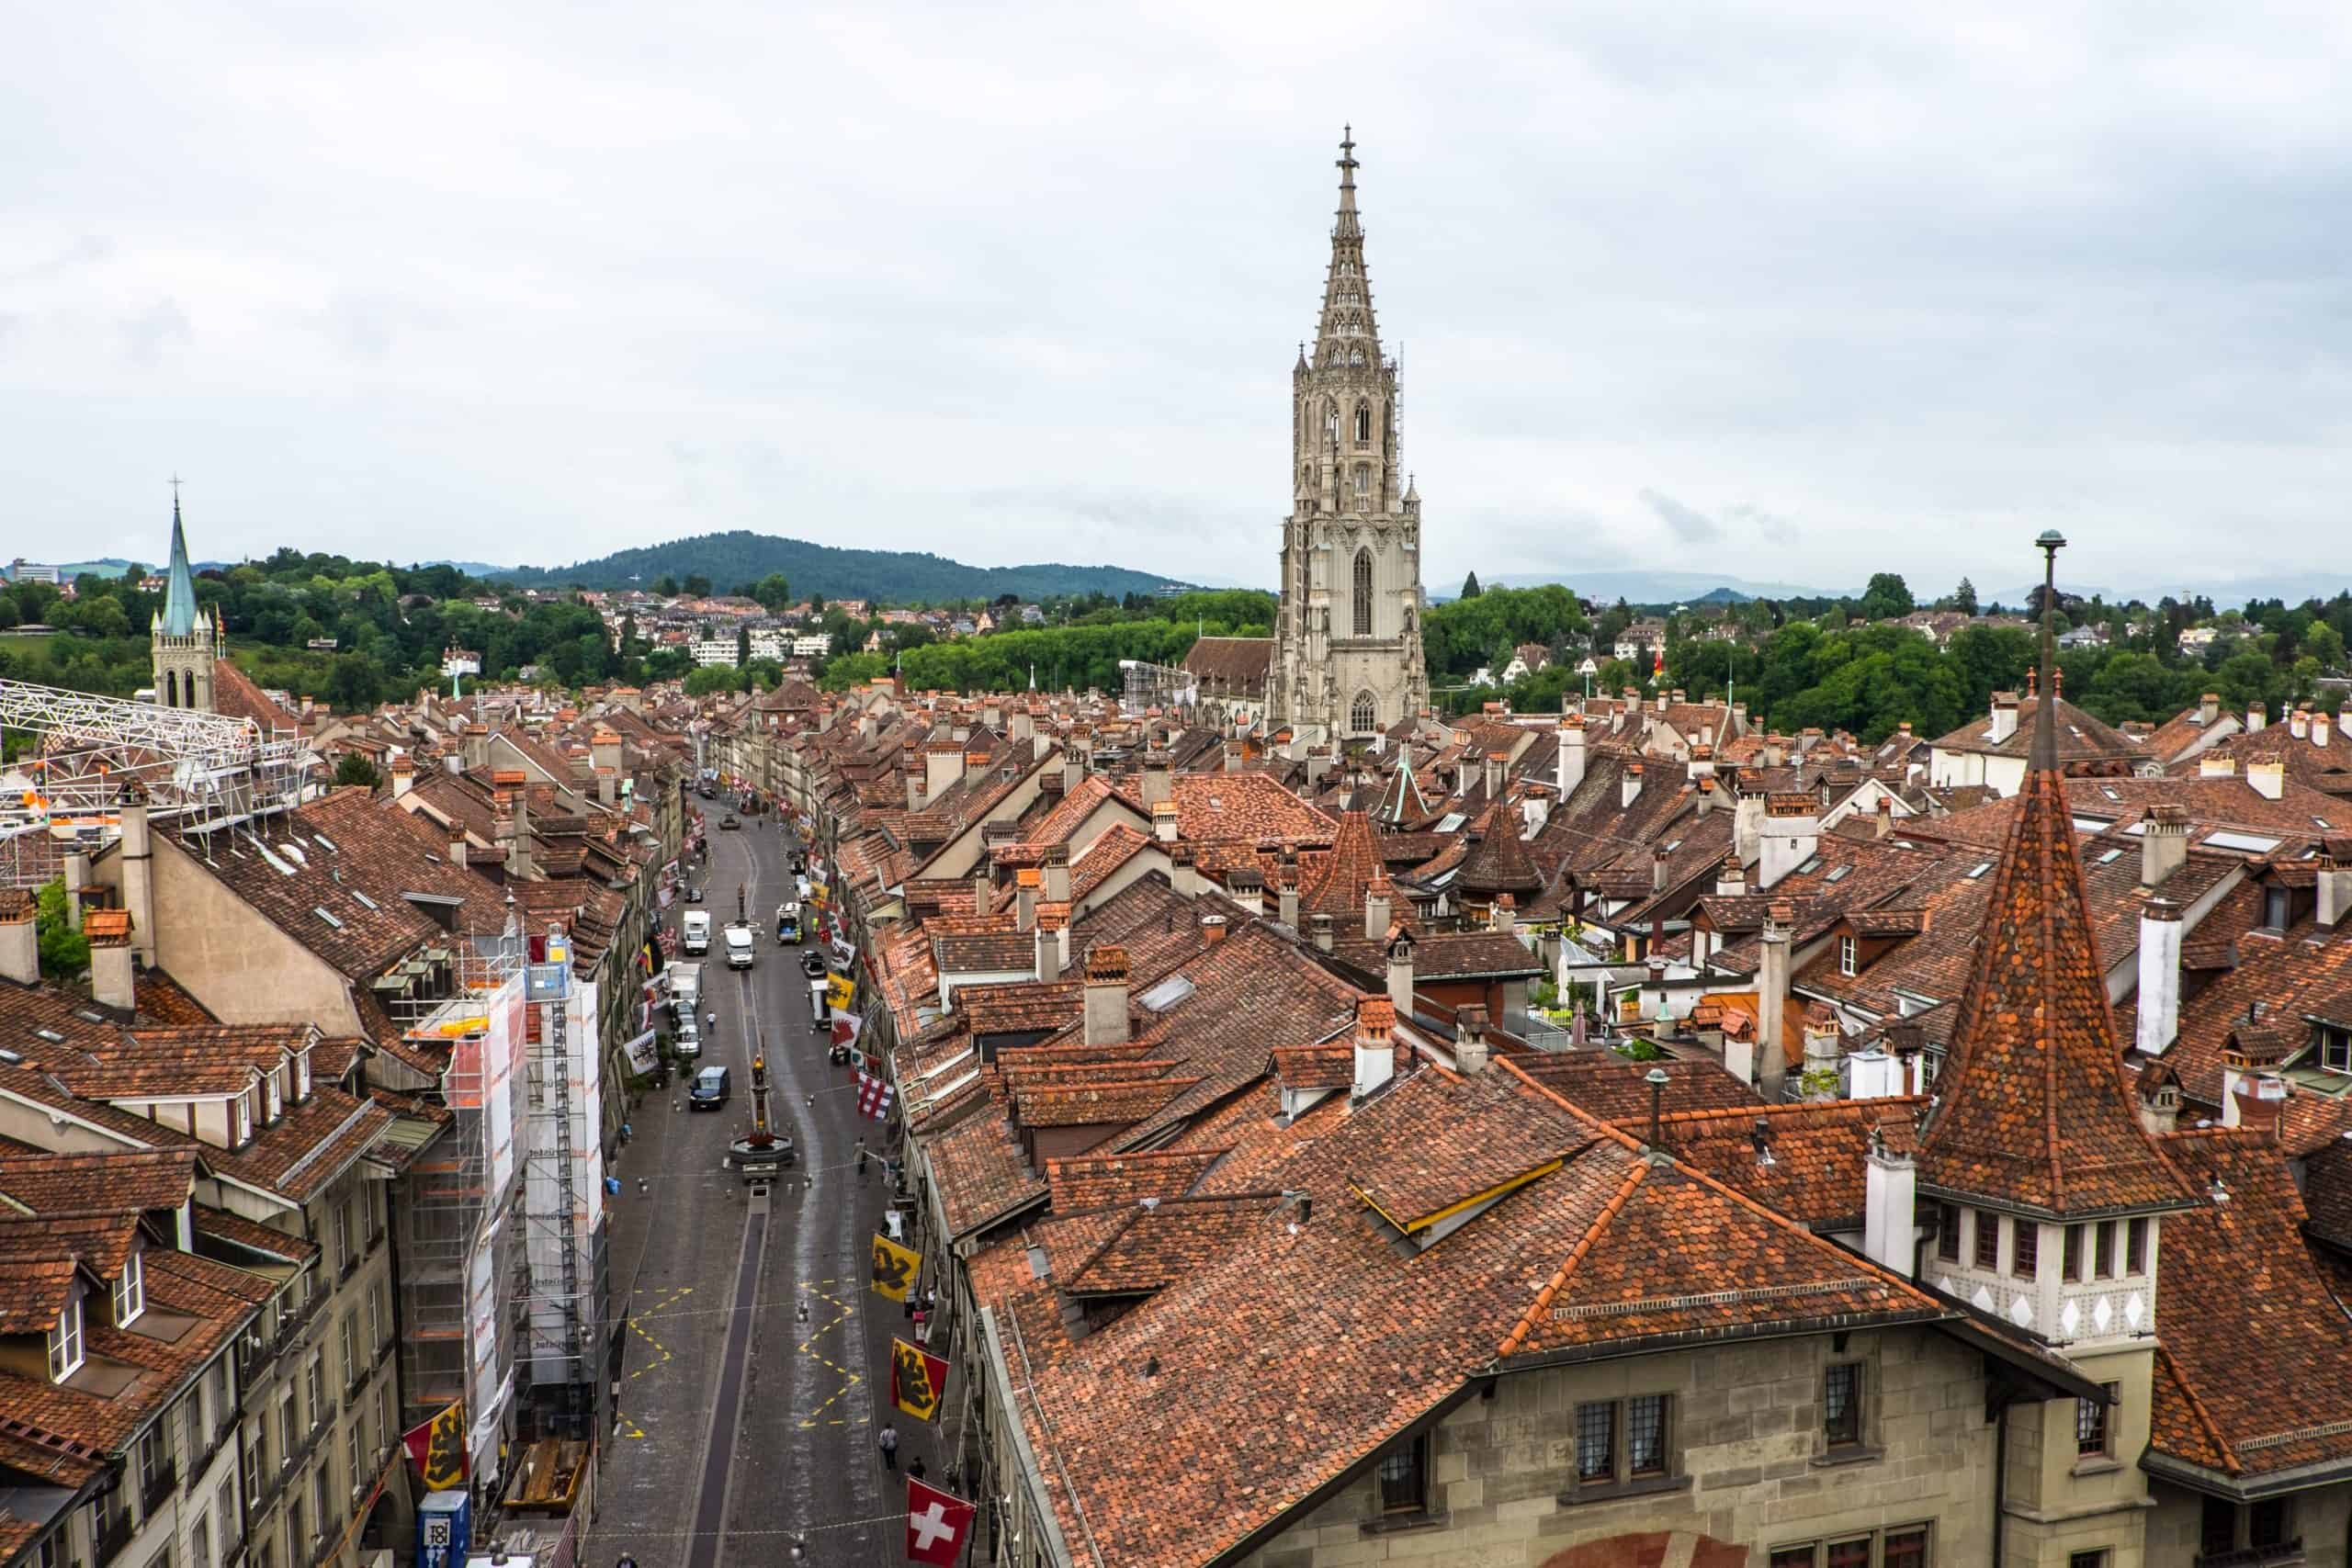 View of Old Bern city and the red rooftops from inside the Zytglogge Clock Tower